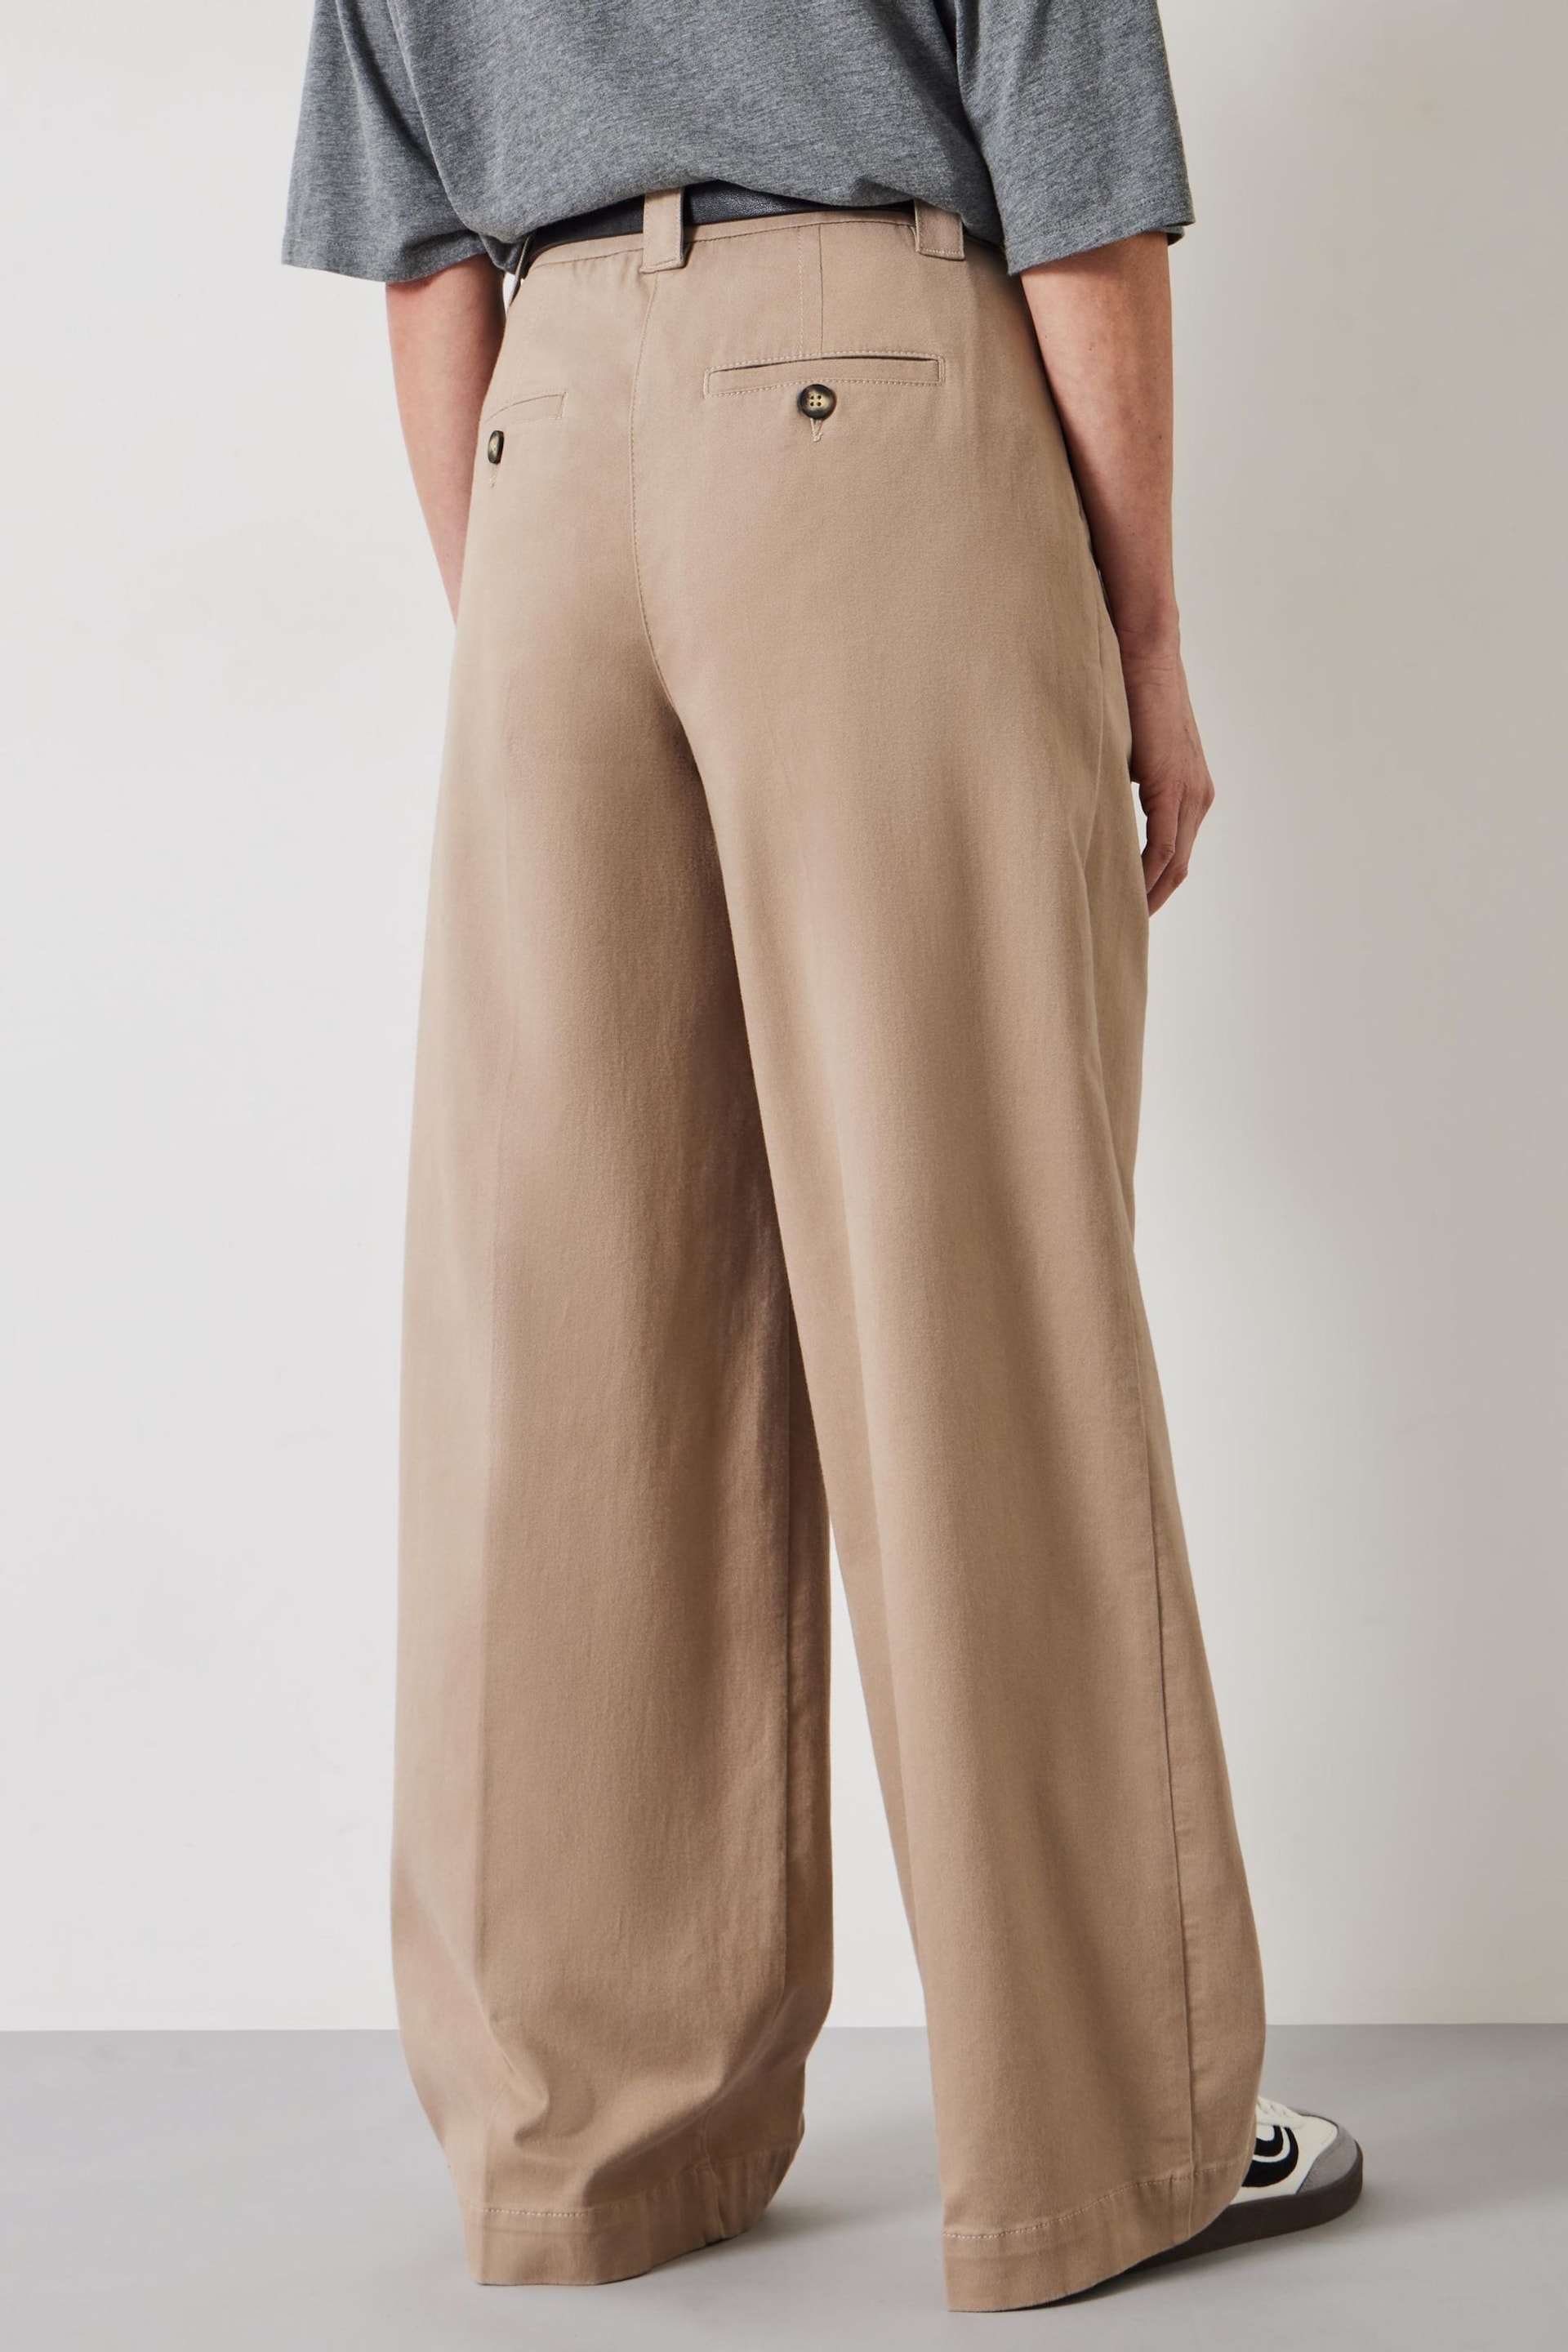 Hush Nude Ali Wide Chino Trousers - Image 3 of 5